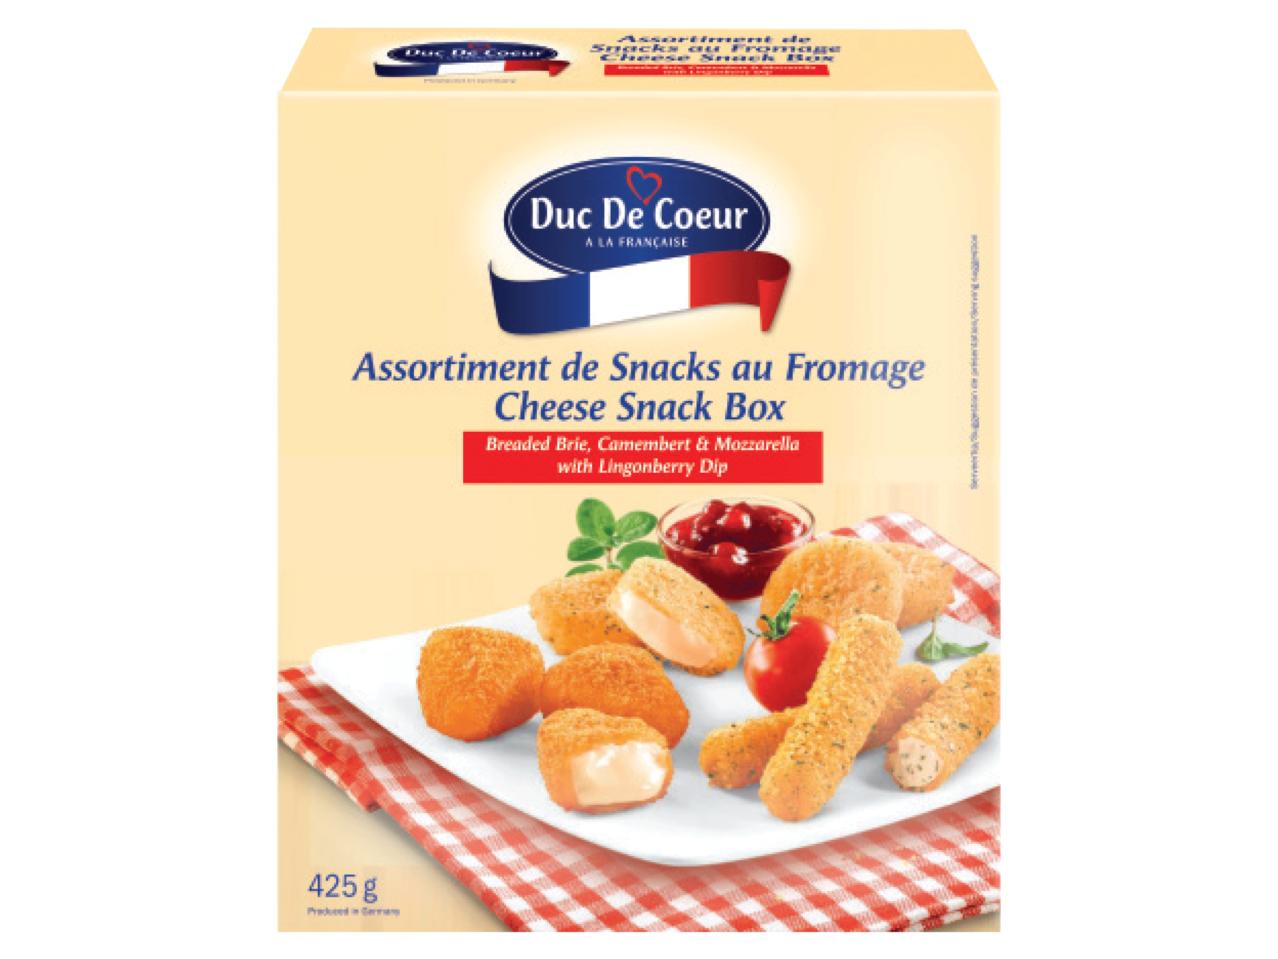 DUC DE COEUR Assorted Snack Box with Lingonberry Dip